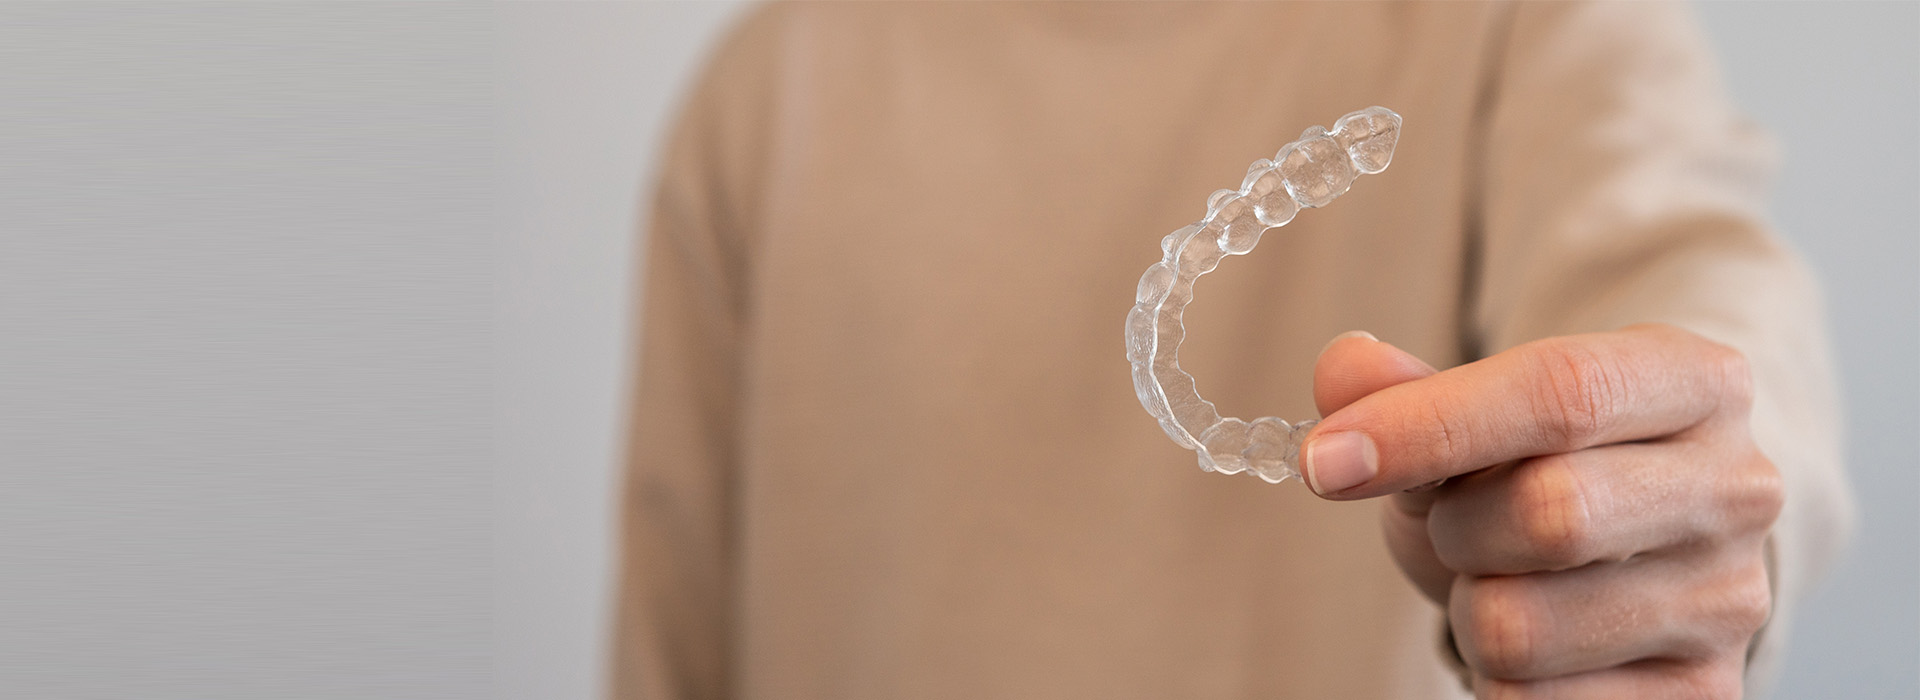 The image shows a person holding a transparent bubble with a hand inside it, against a plain background.